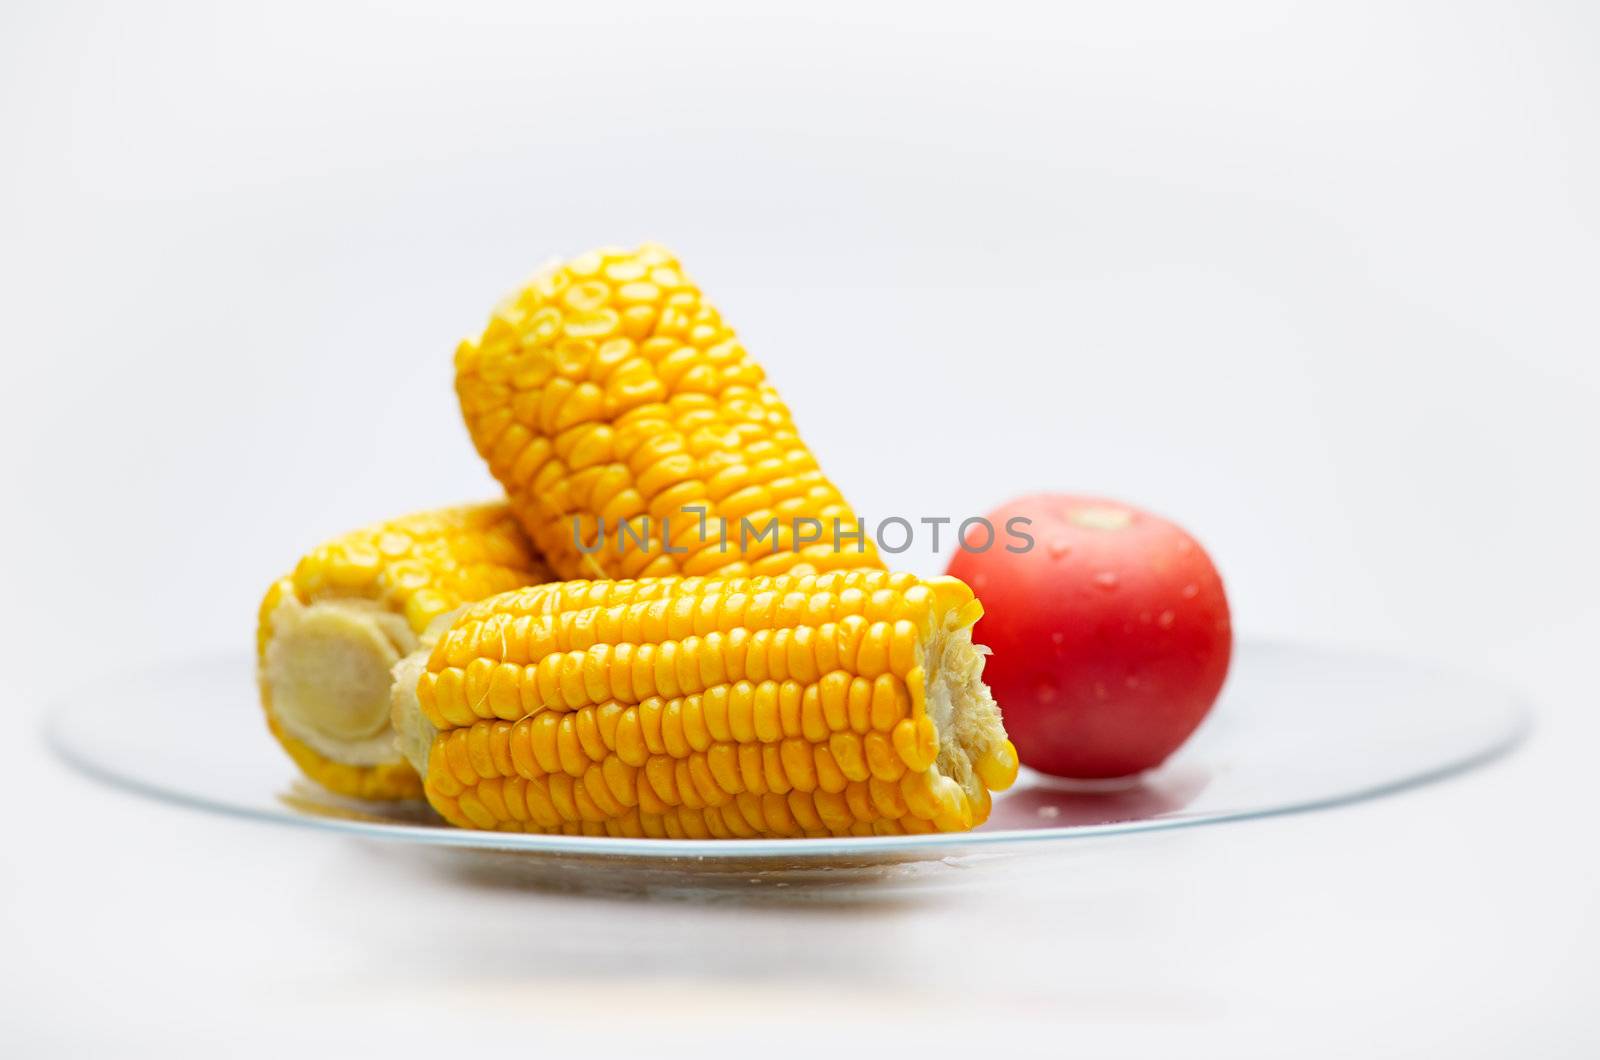 Corn Cobs and tomato on a glass plate. Small DOF by kirs-ua